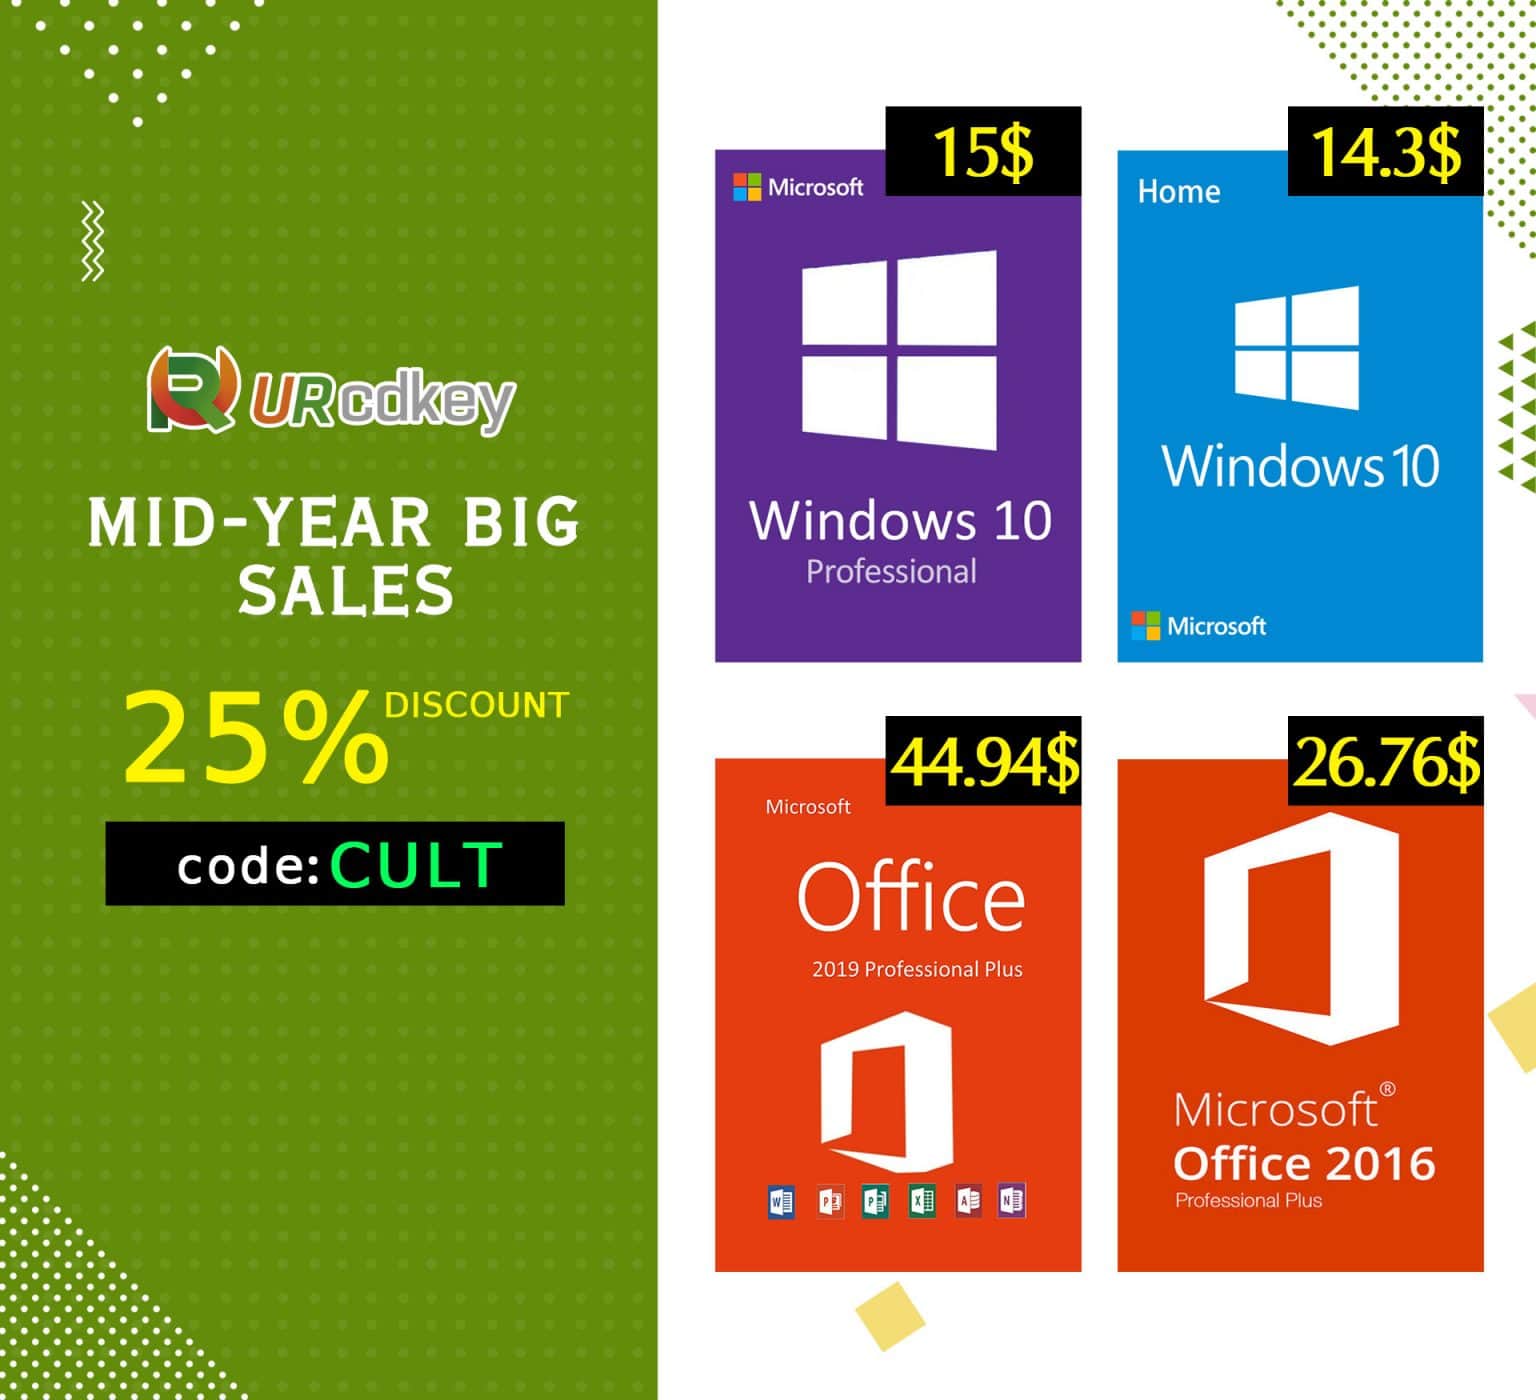 During the June sale at URcdkey.com, you can get 25% to 35% off Microsoft software activation keys.